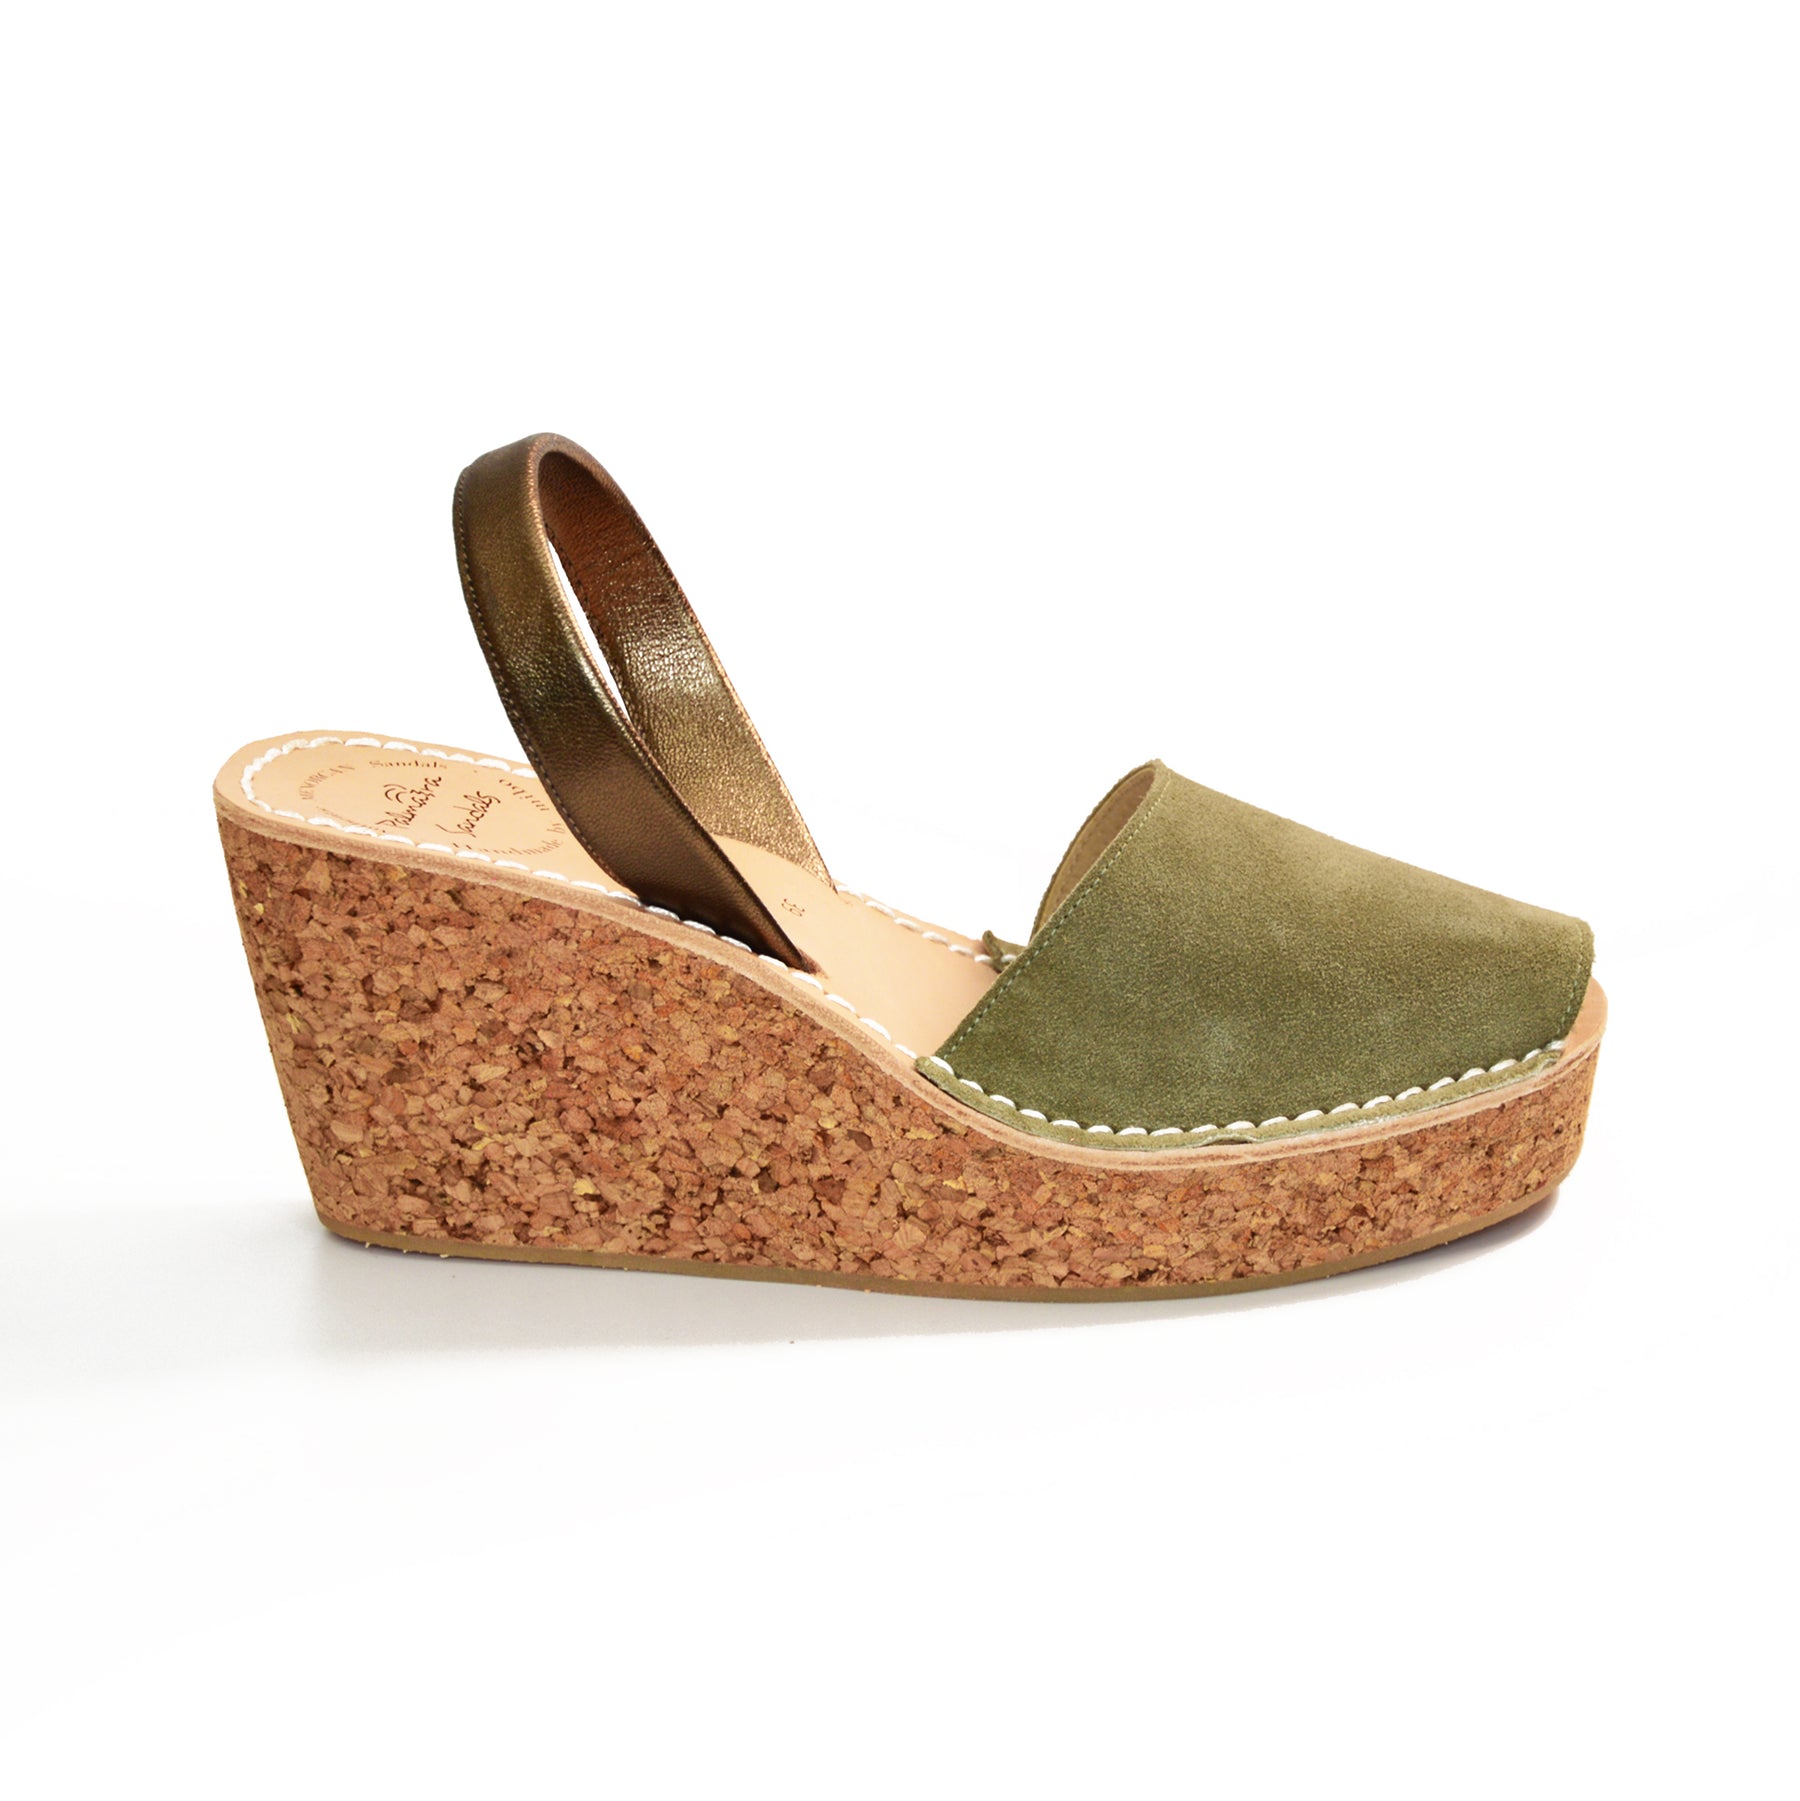 Khaki suede leather mid height avarca sandals with a lightweight cork wedge sole